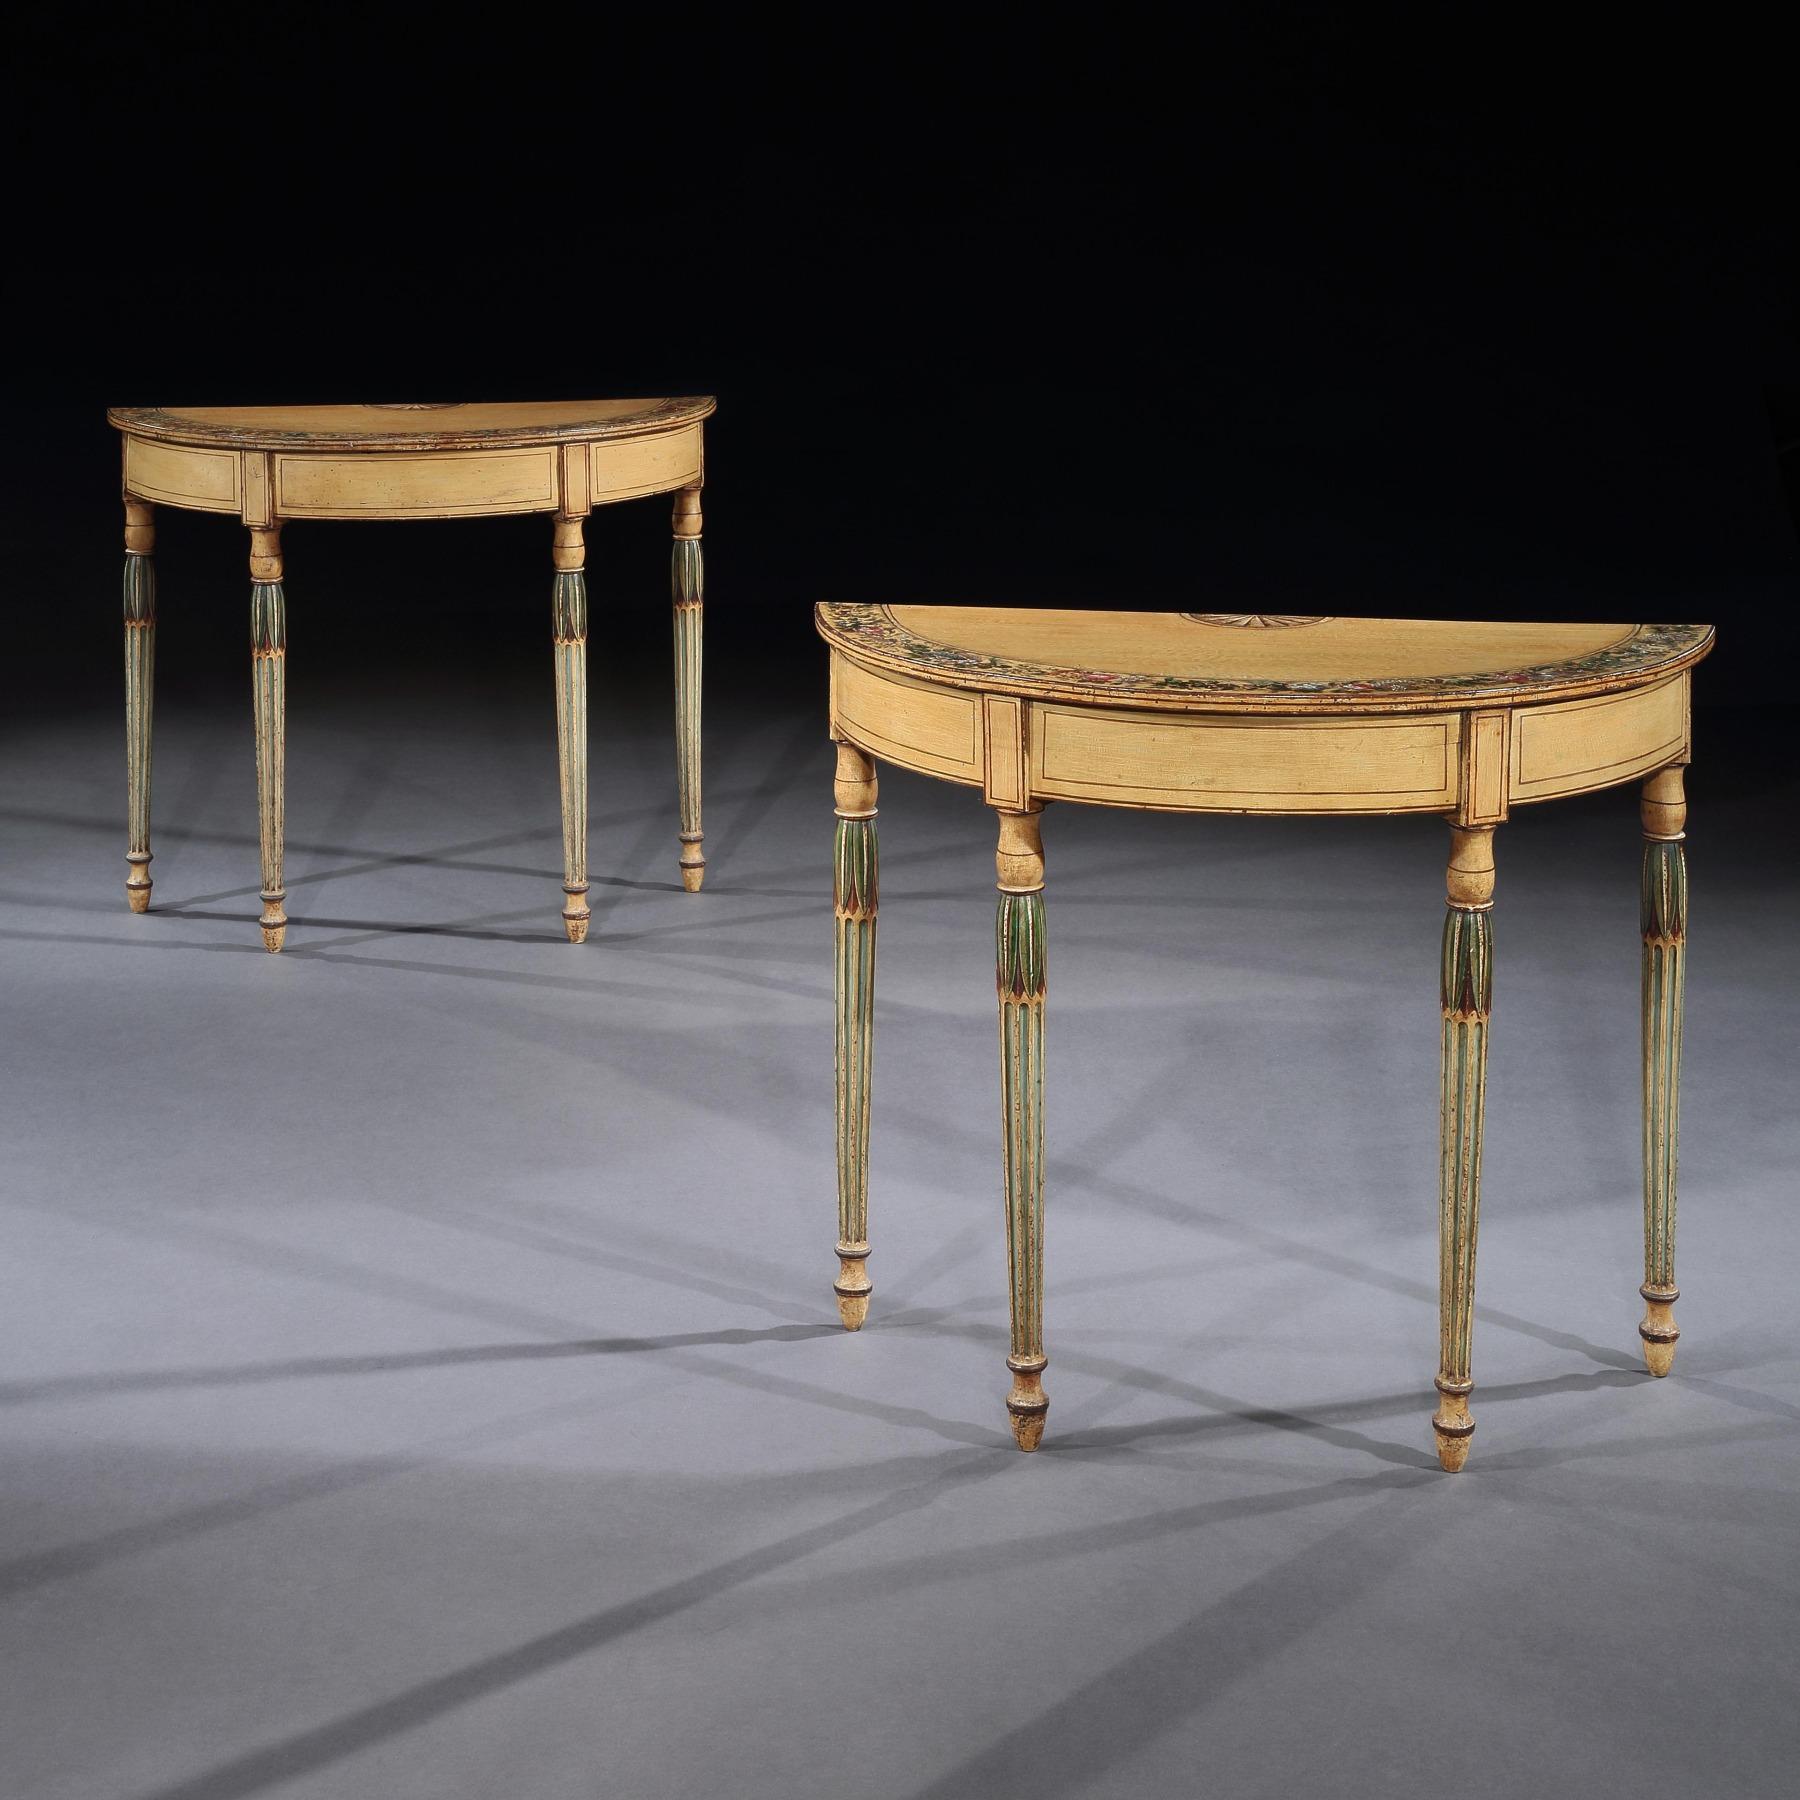 A very fine pair of late 18th century original painted demilune pier tables reminiscent of the work of Seddon, Sons and Shackleton.

English circa 1795.

An elegant and rare pair of painted demi-lune pier / console tables, wood-grained all over,